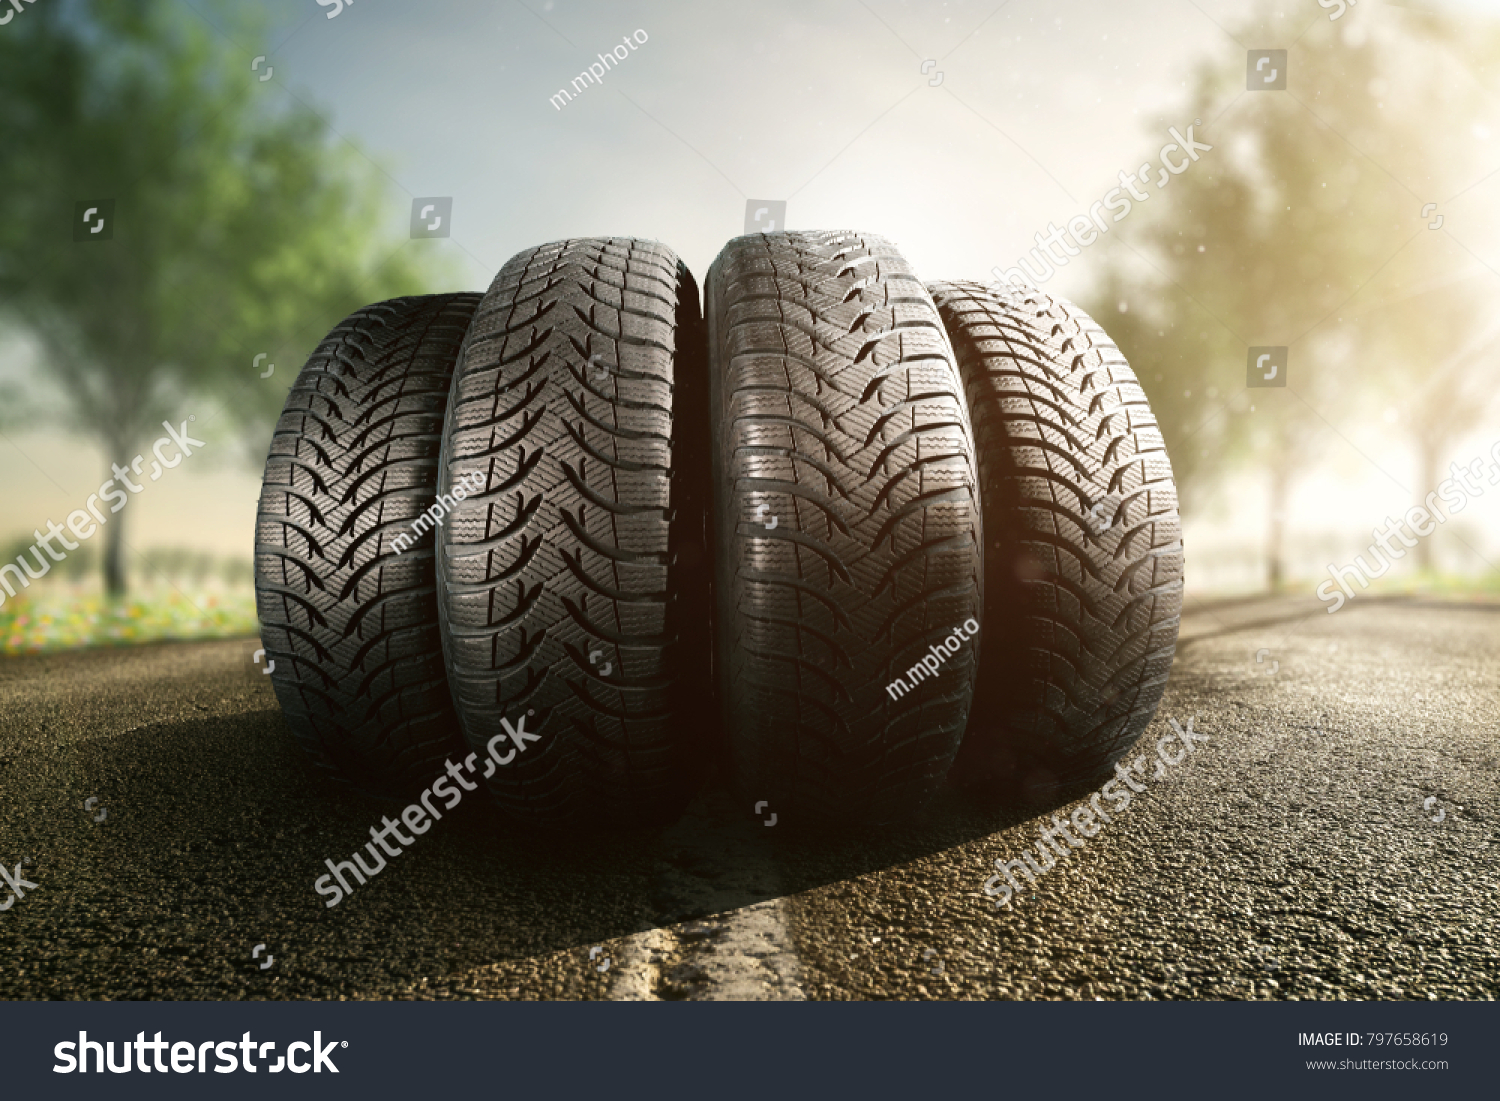 Summer tires on a street #797658619